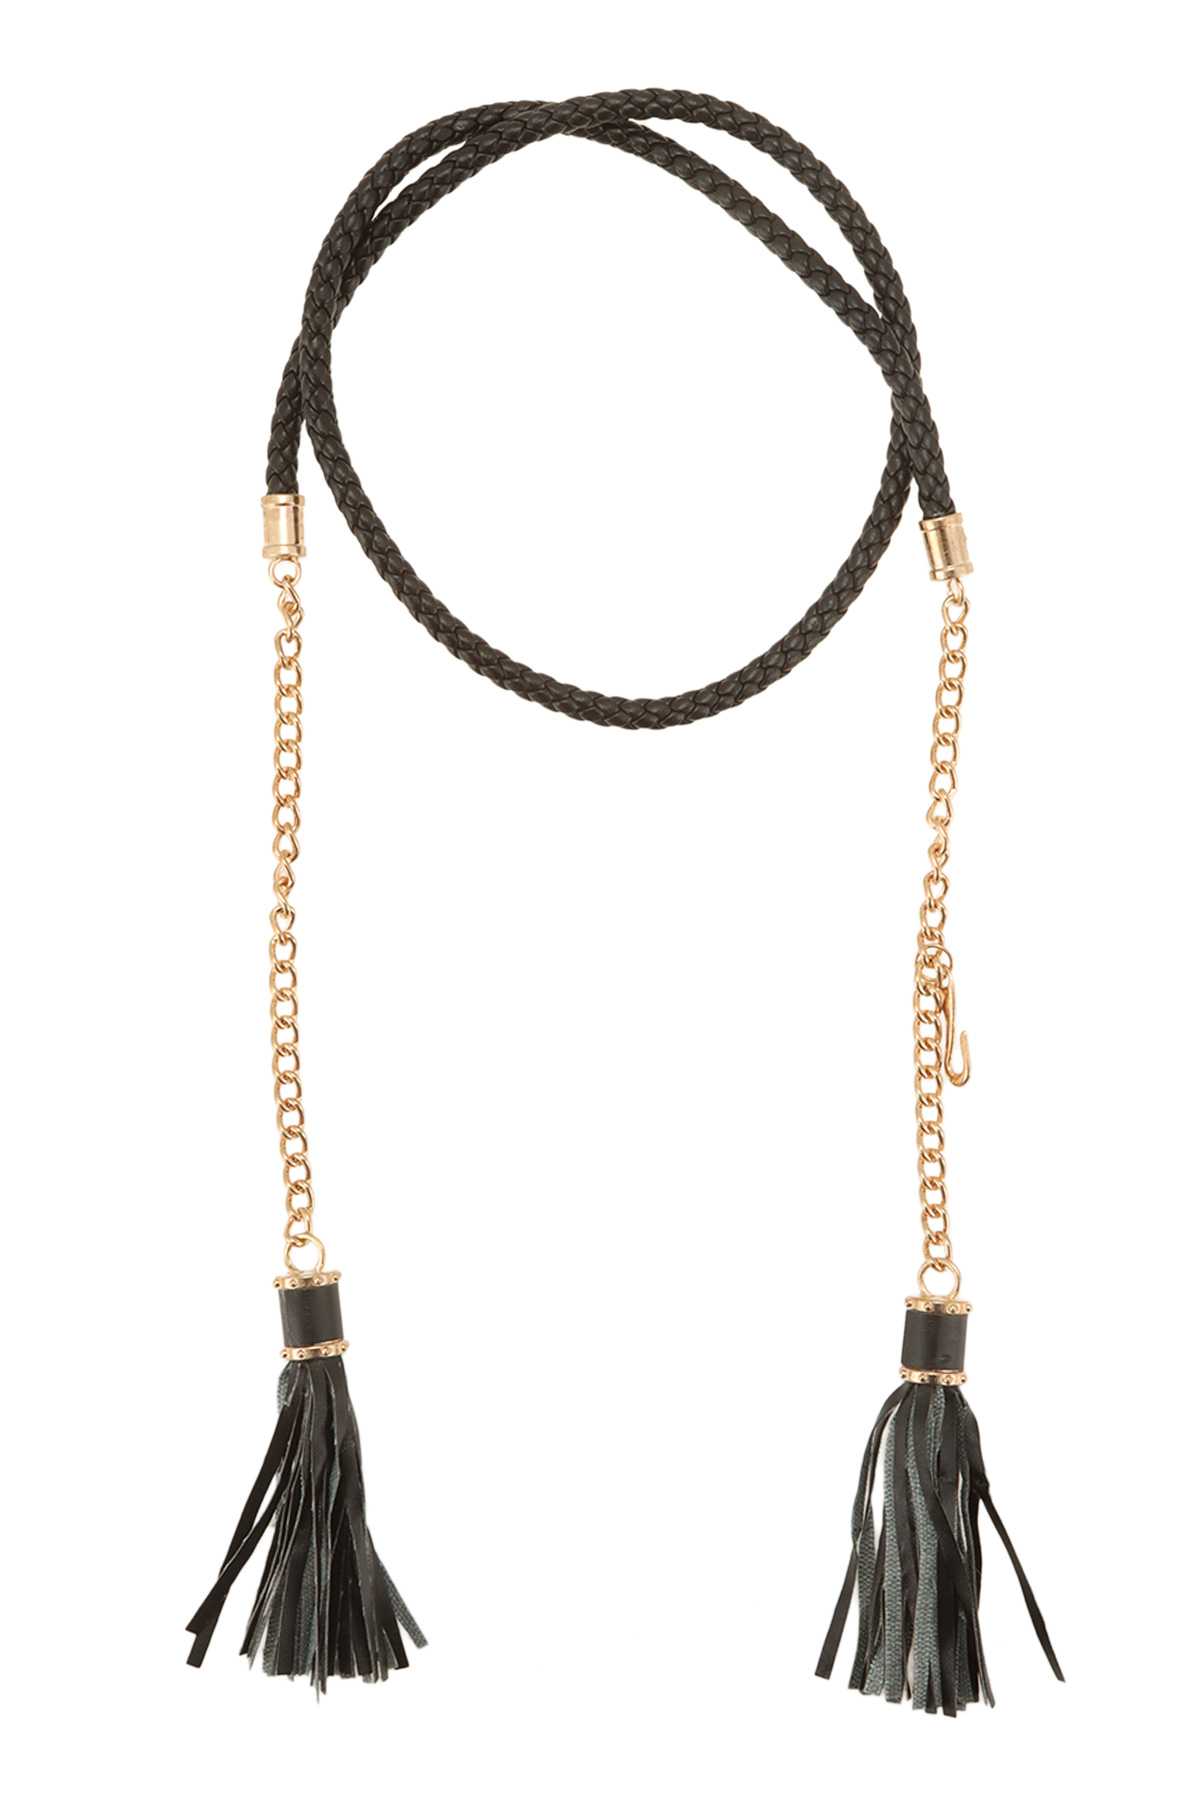 Braided faux leather Belt with chain and tassel